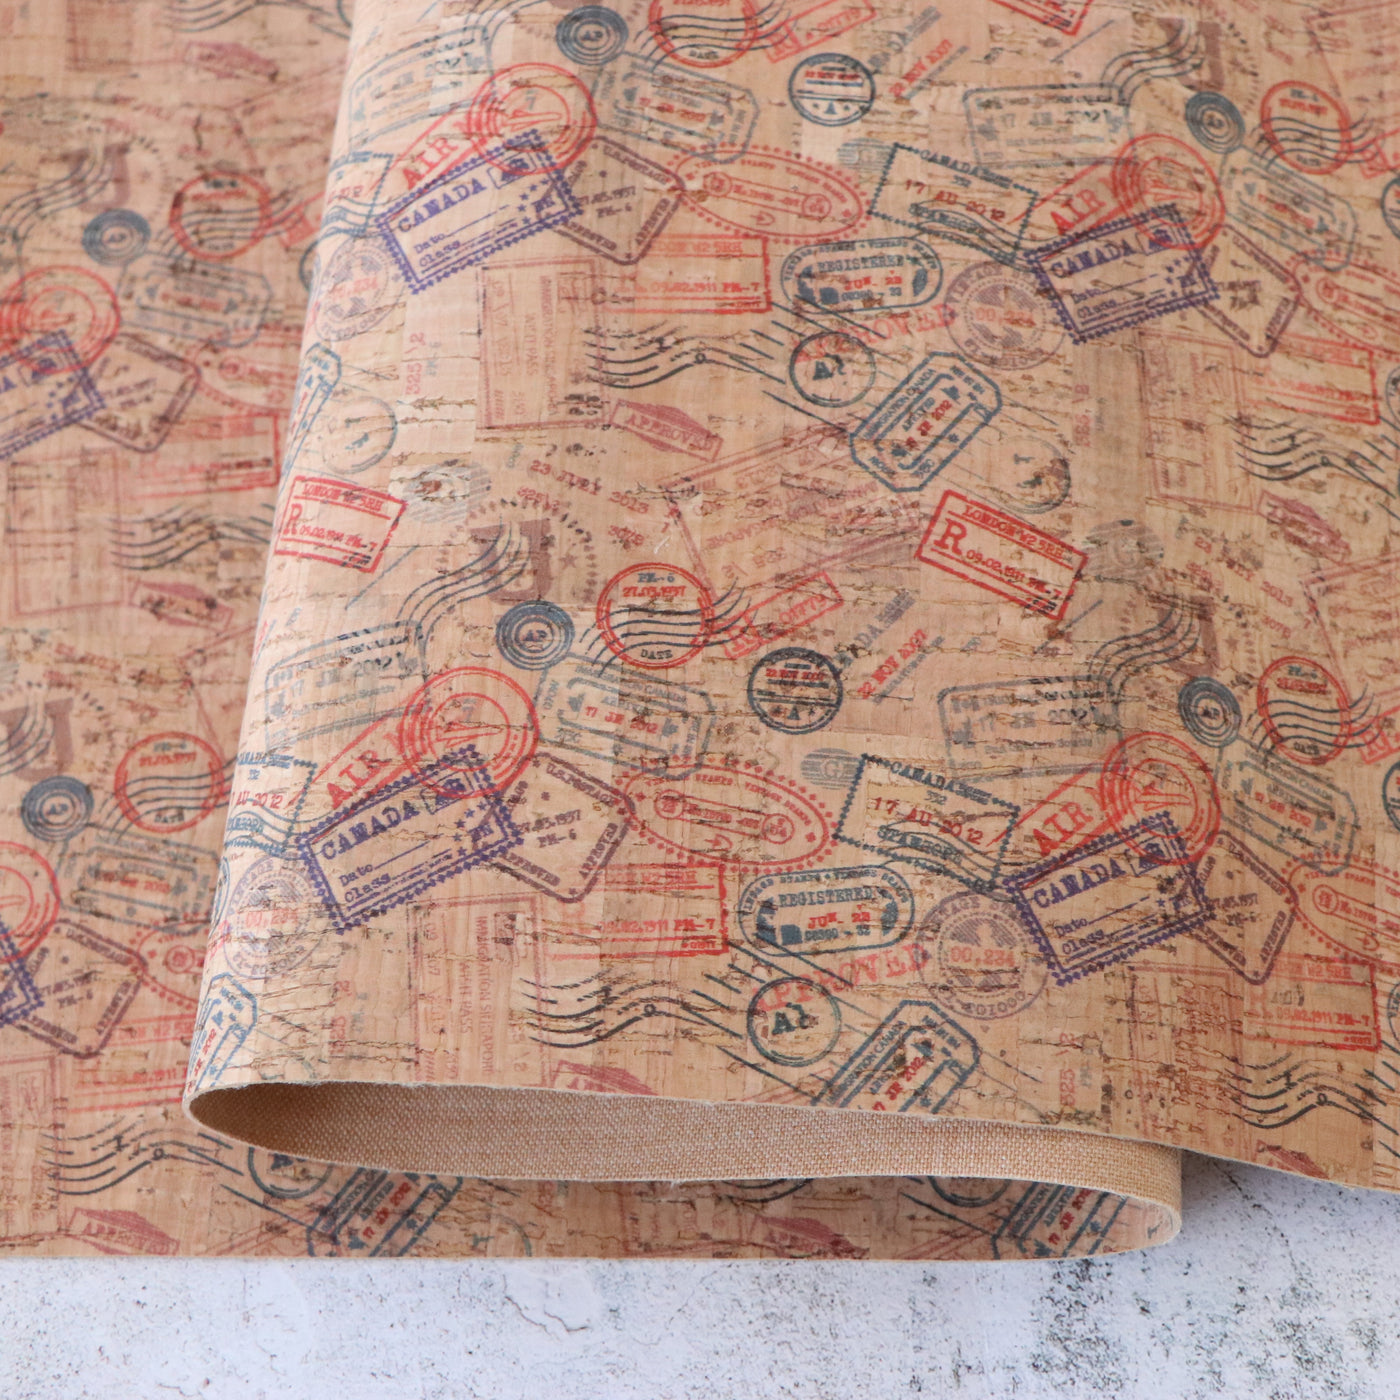 Postage Stamps Cork Fabric